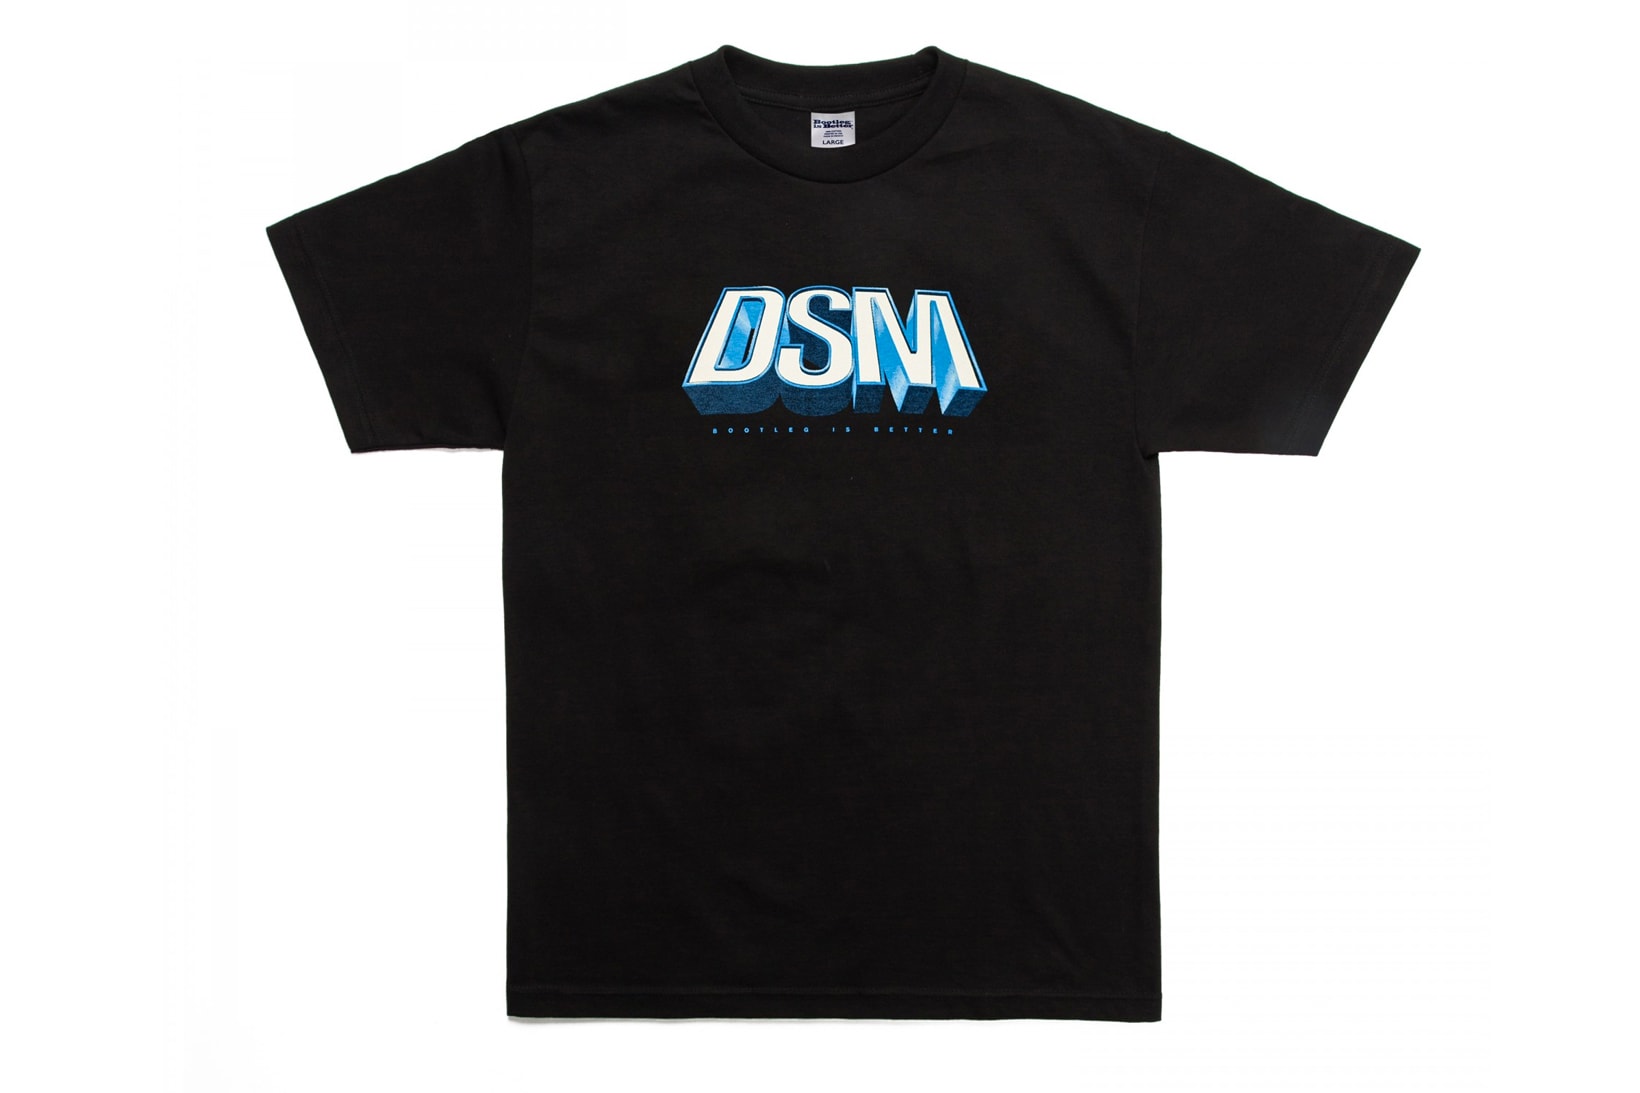 Bootleg Is Better and DSM Dover Street Market Seinfeld-Inspired T-shirt Collection